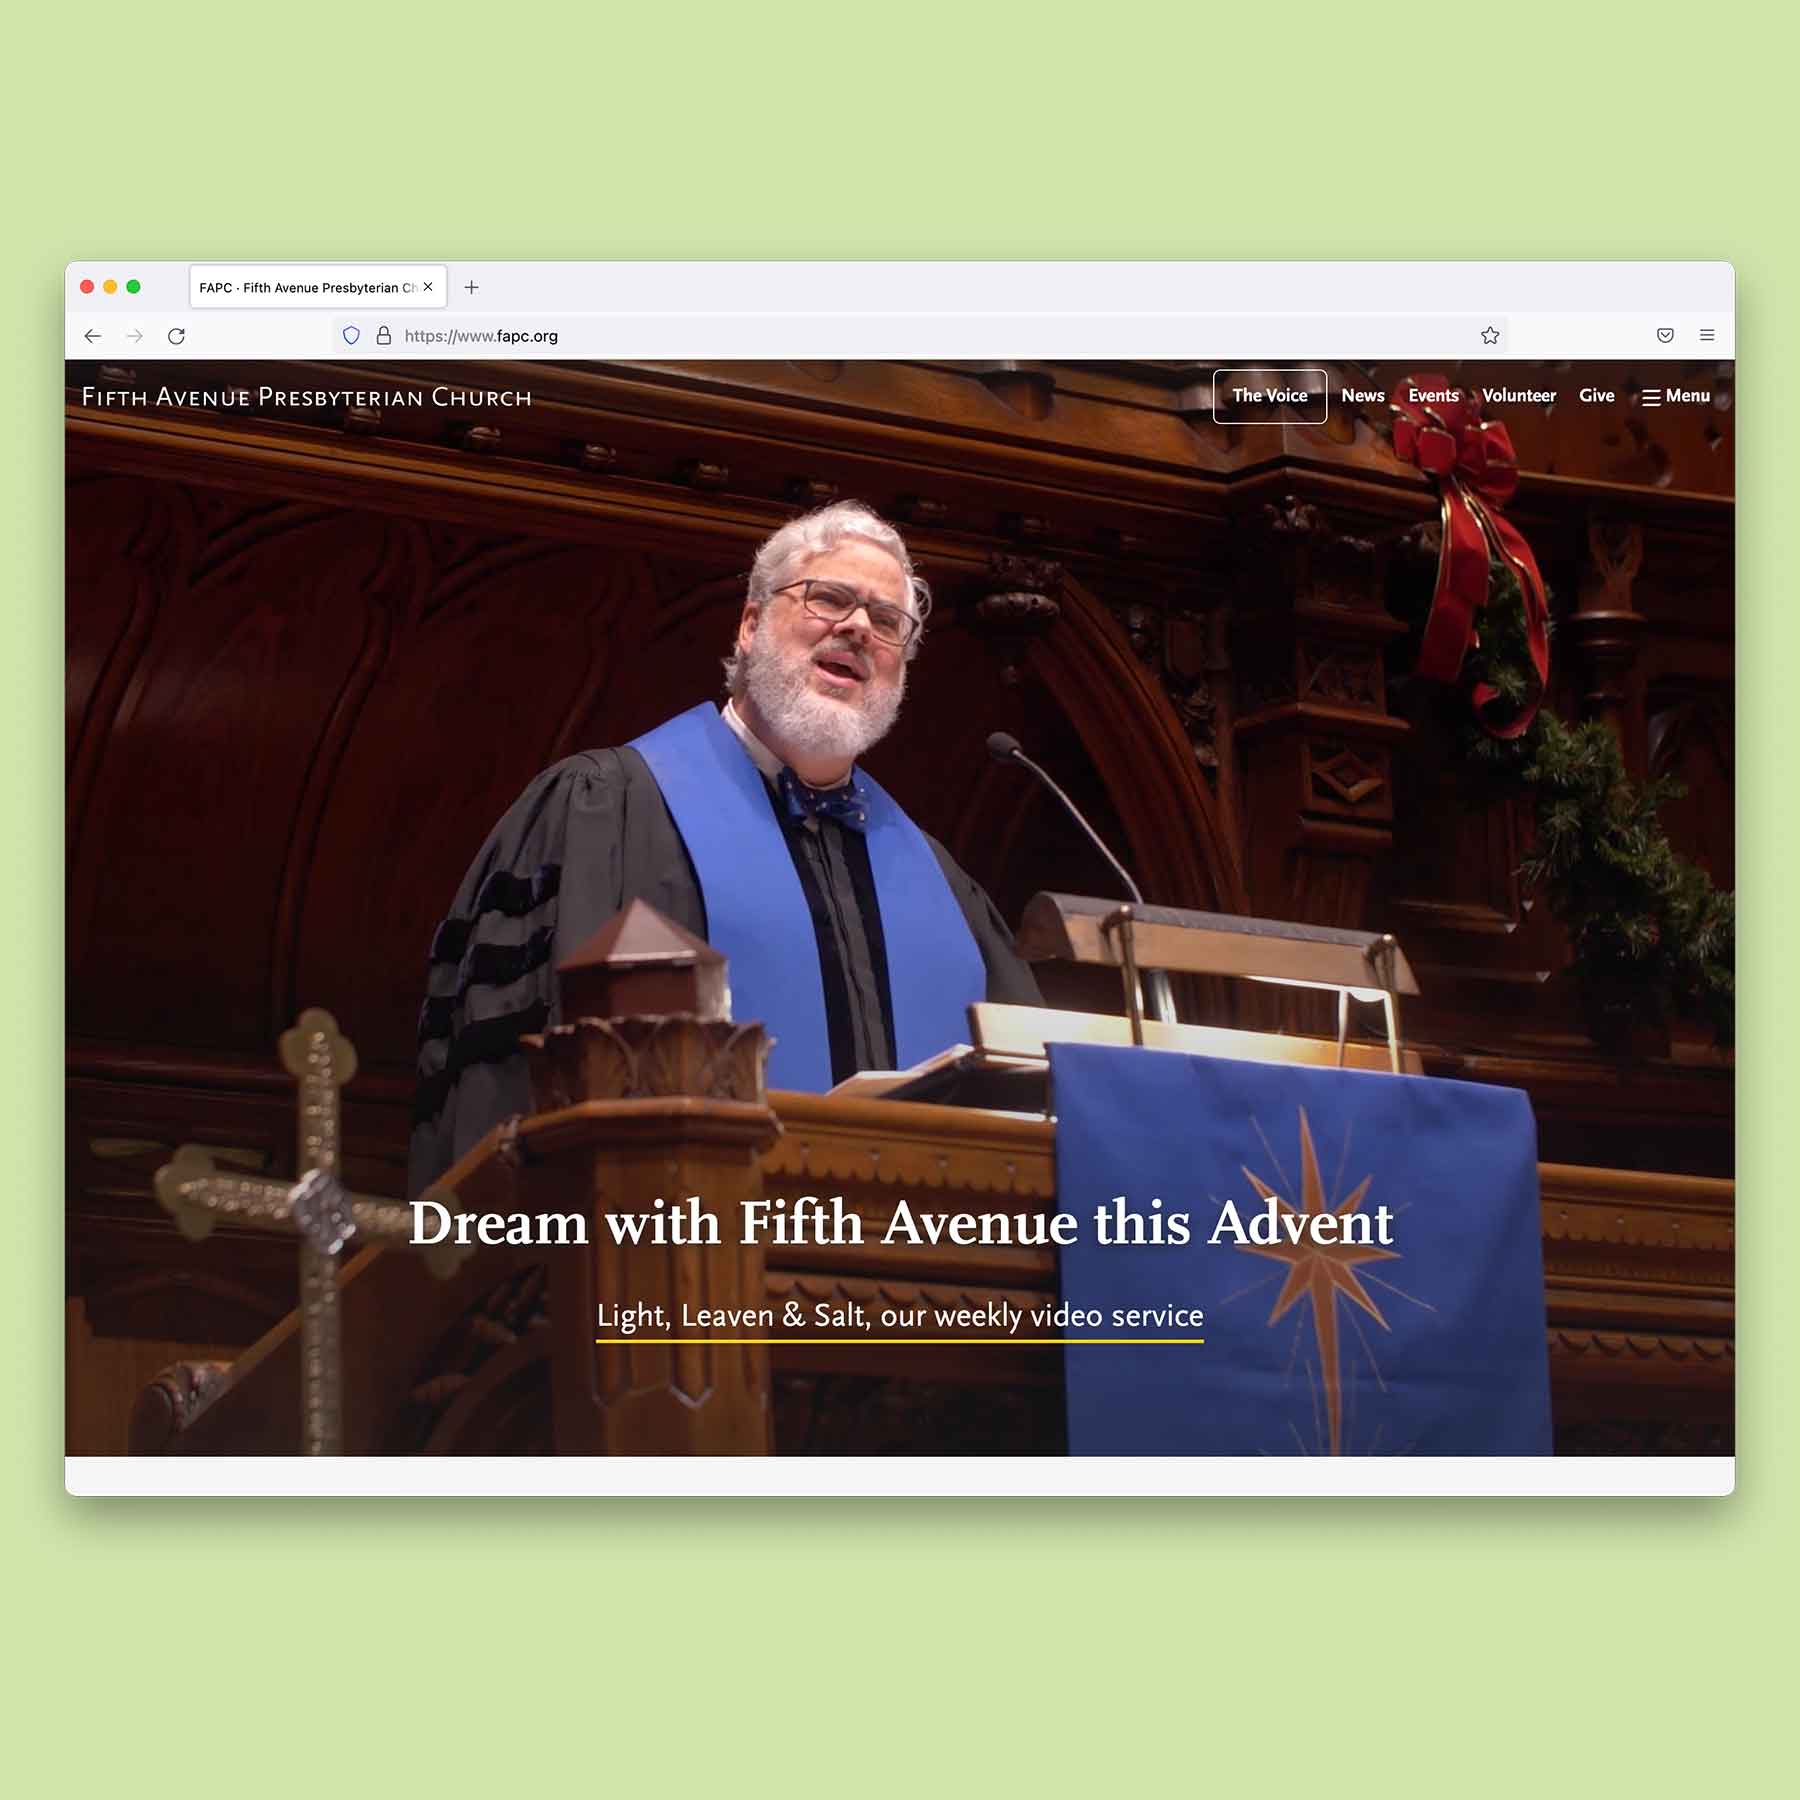 The redesigned Fifth Avenue Presbyterian Church homepage